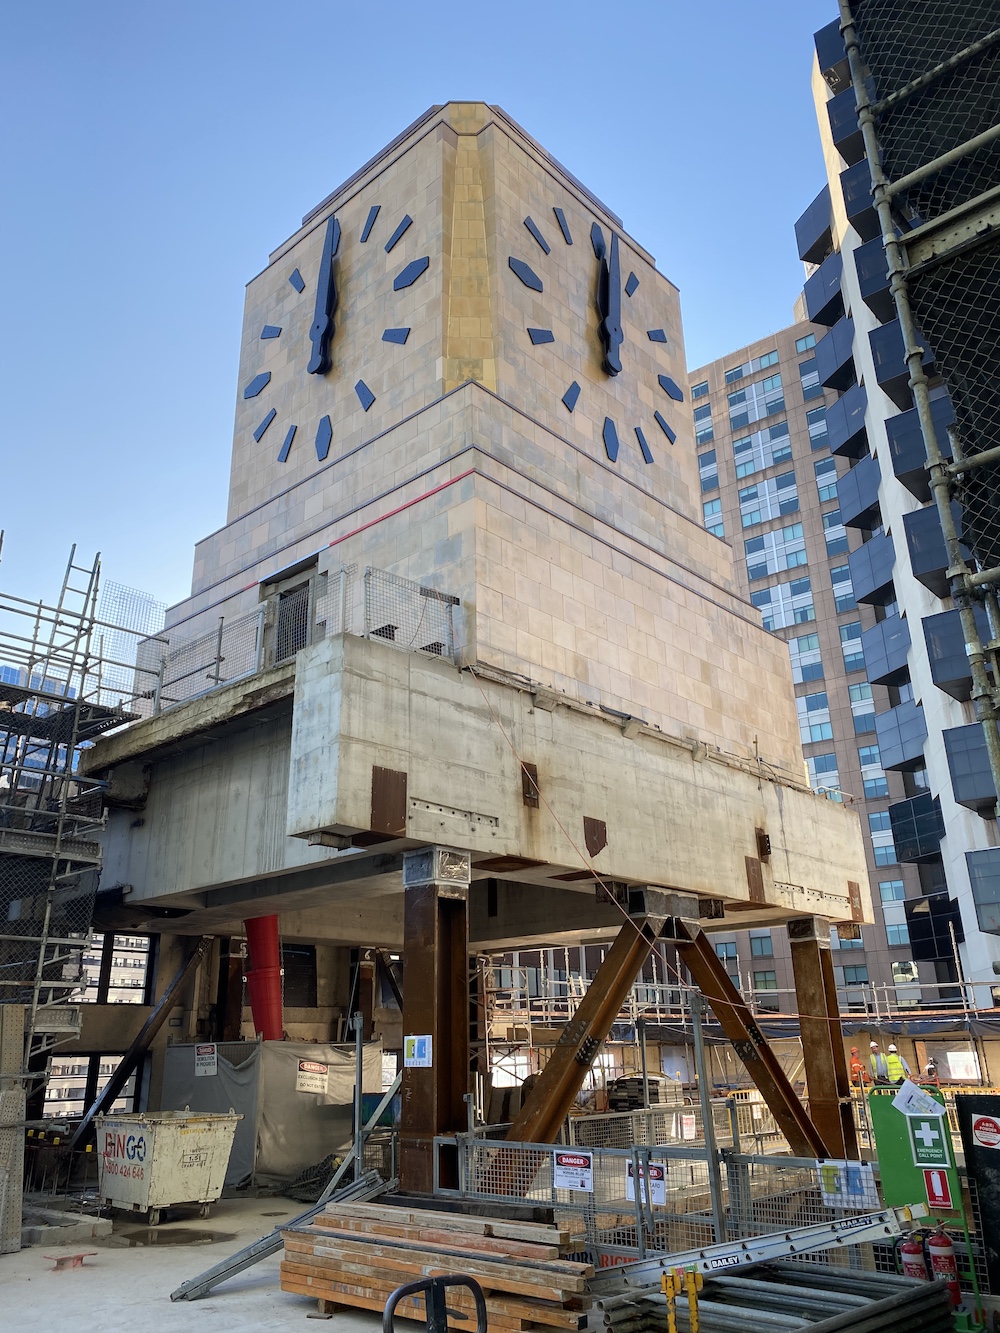 The Shell House clock tower was suspended for years as redevelopment works were underway